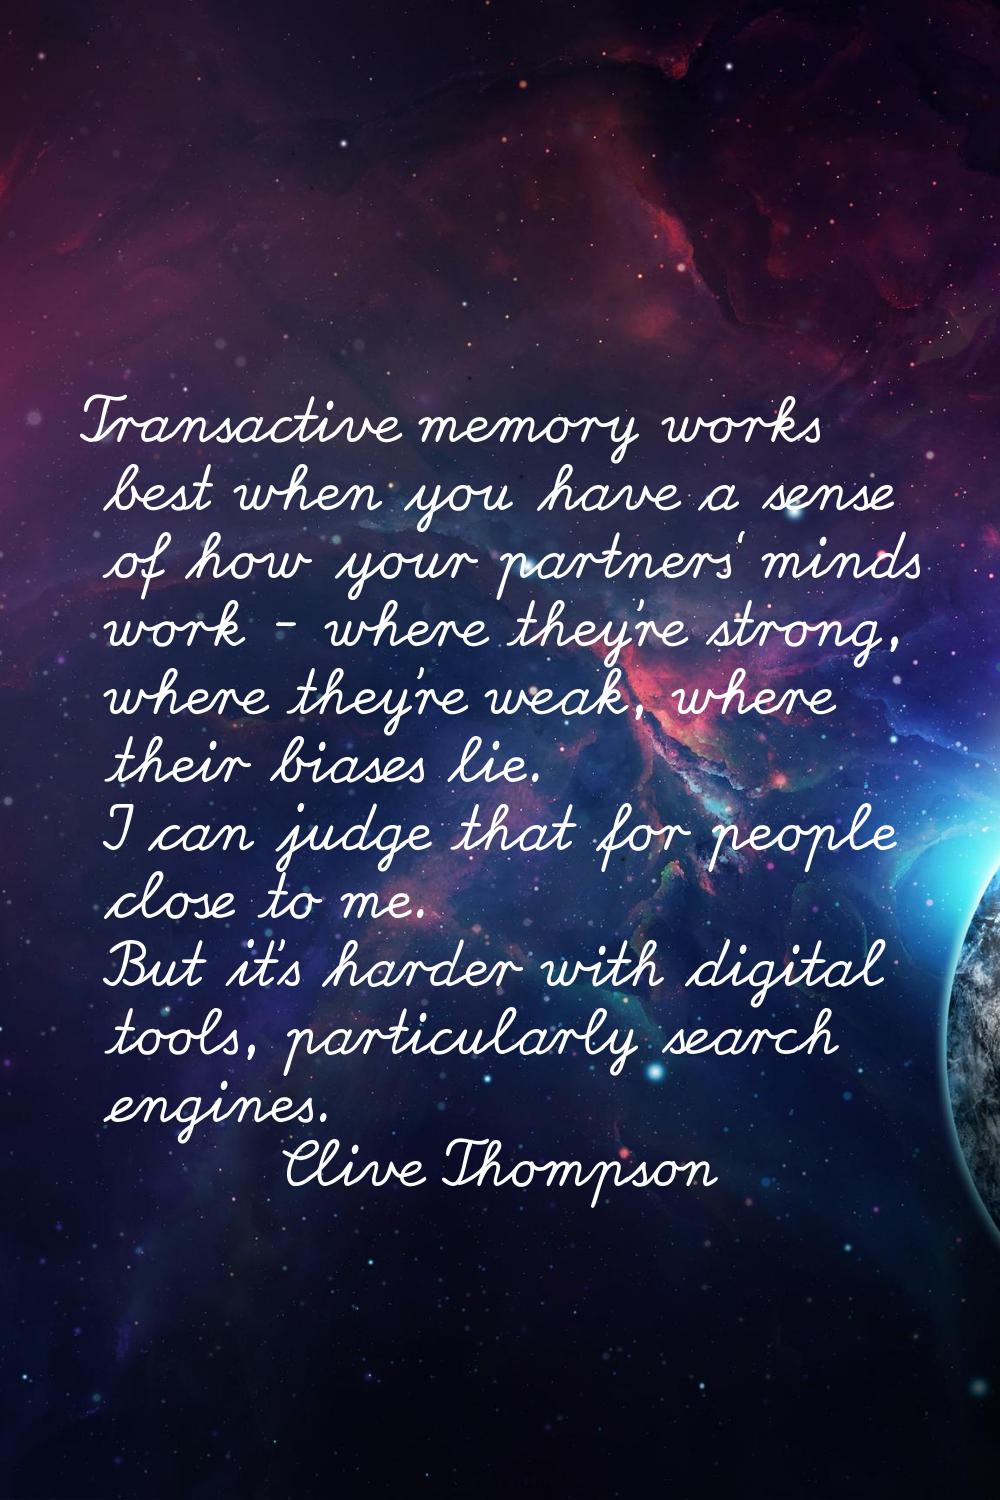 Transactive memory works best when you have a sense of how your partners' minds work - where they'r